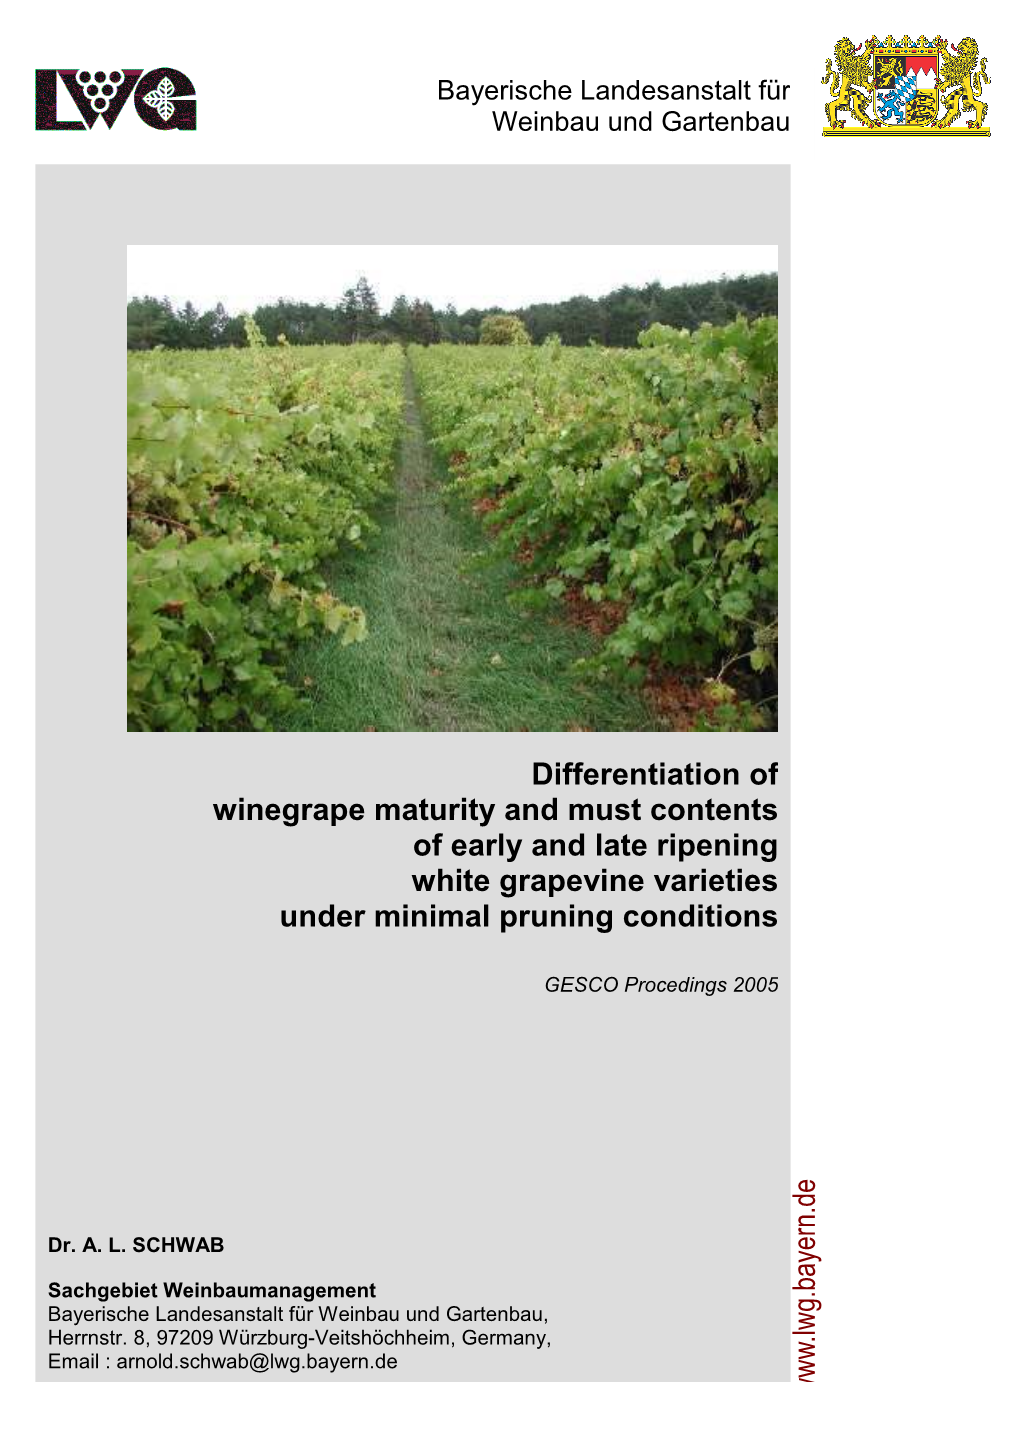 Differentiation of Winegrape Maturity and Must Contents of Early and Late Ripening White Grapevine Varieties Under Minimal Pruning Conditions